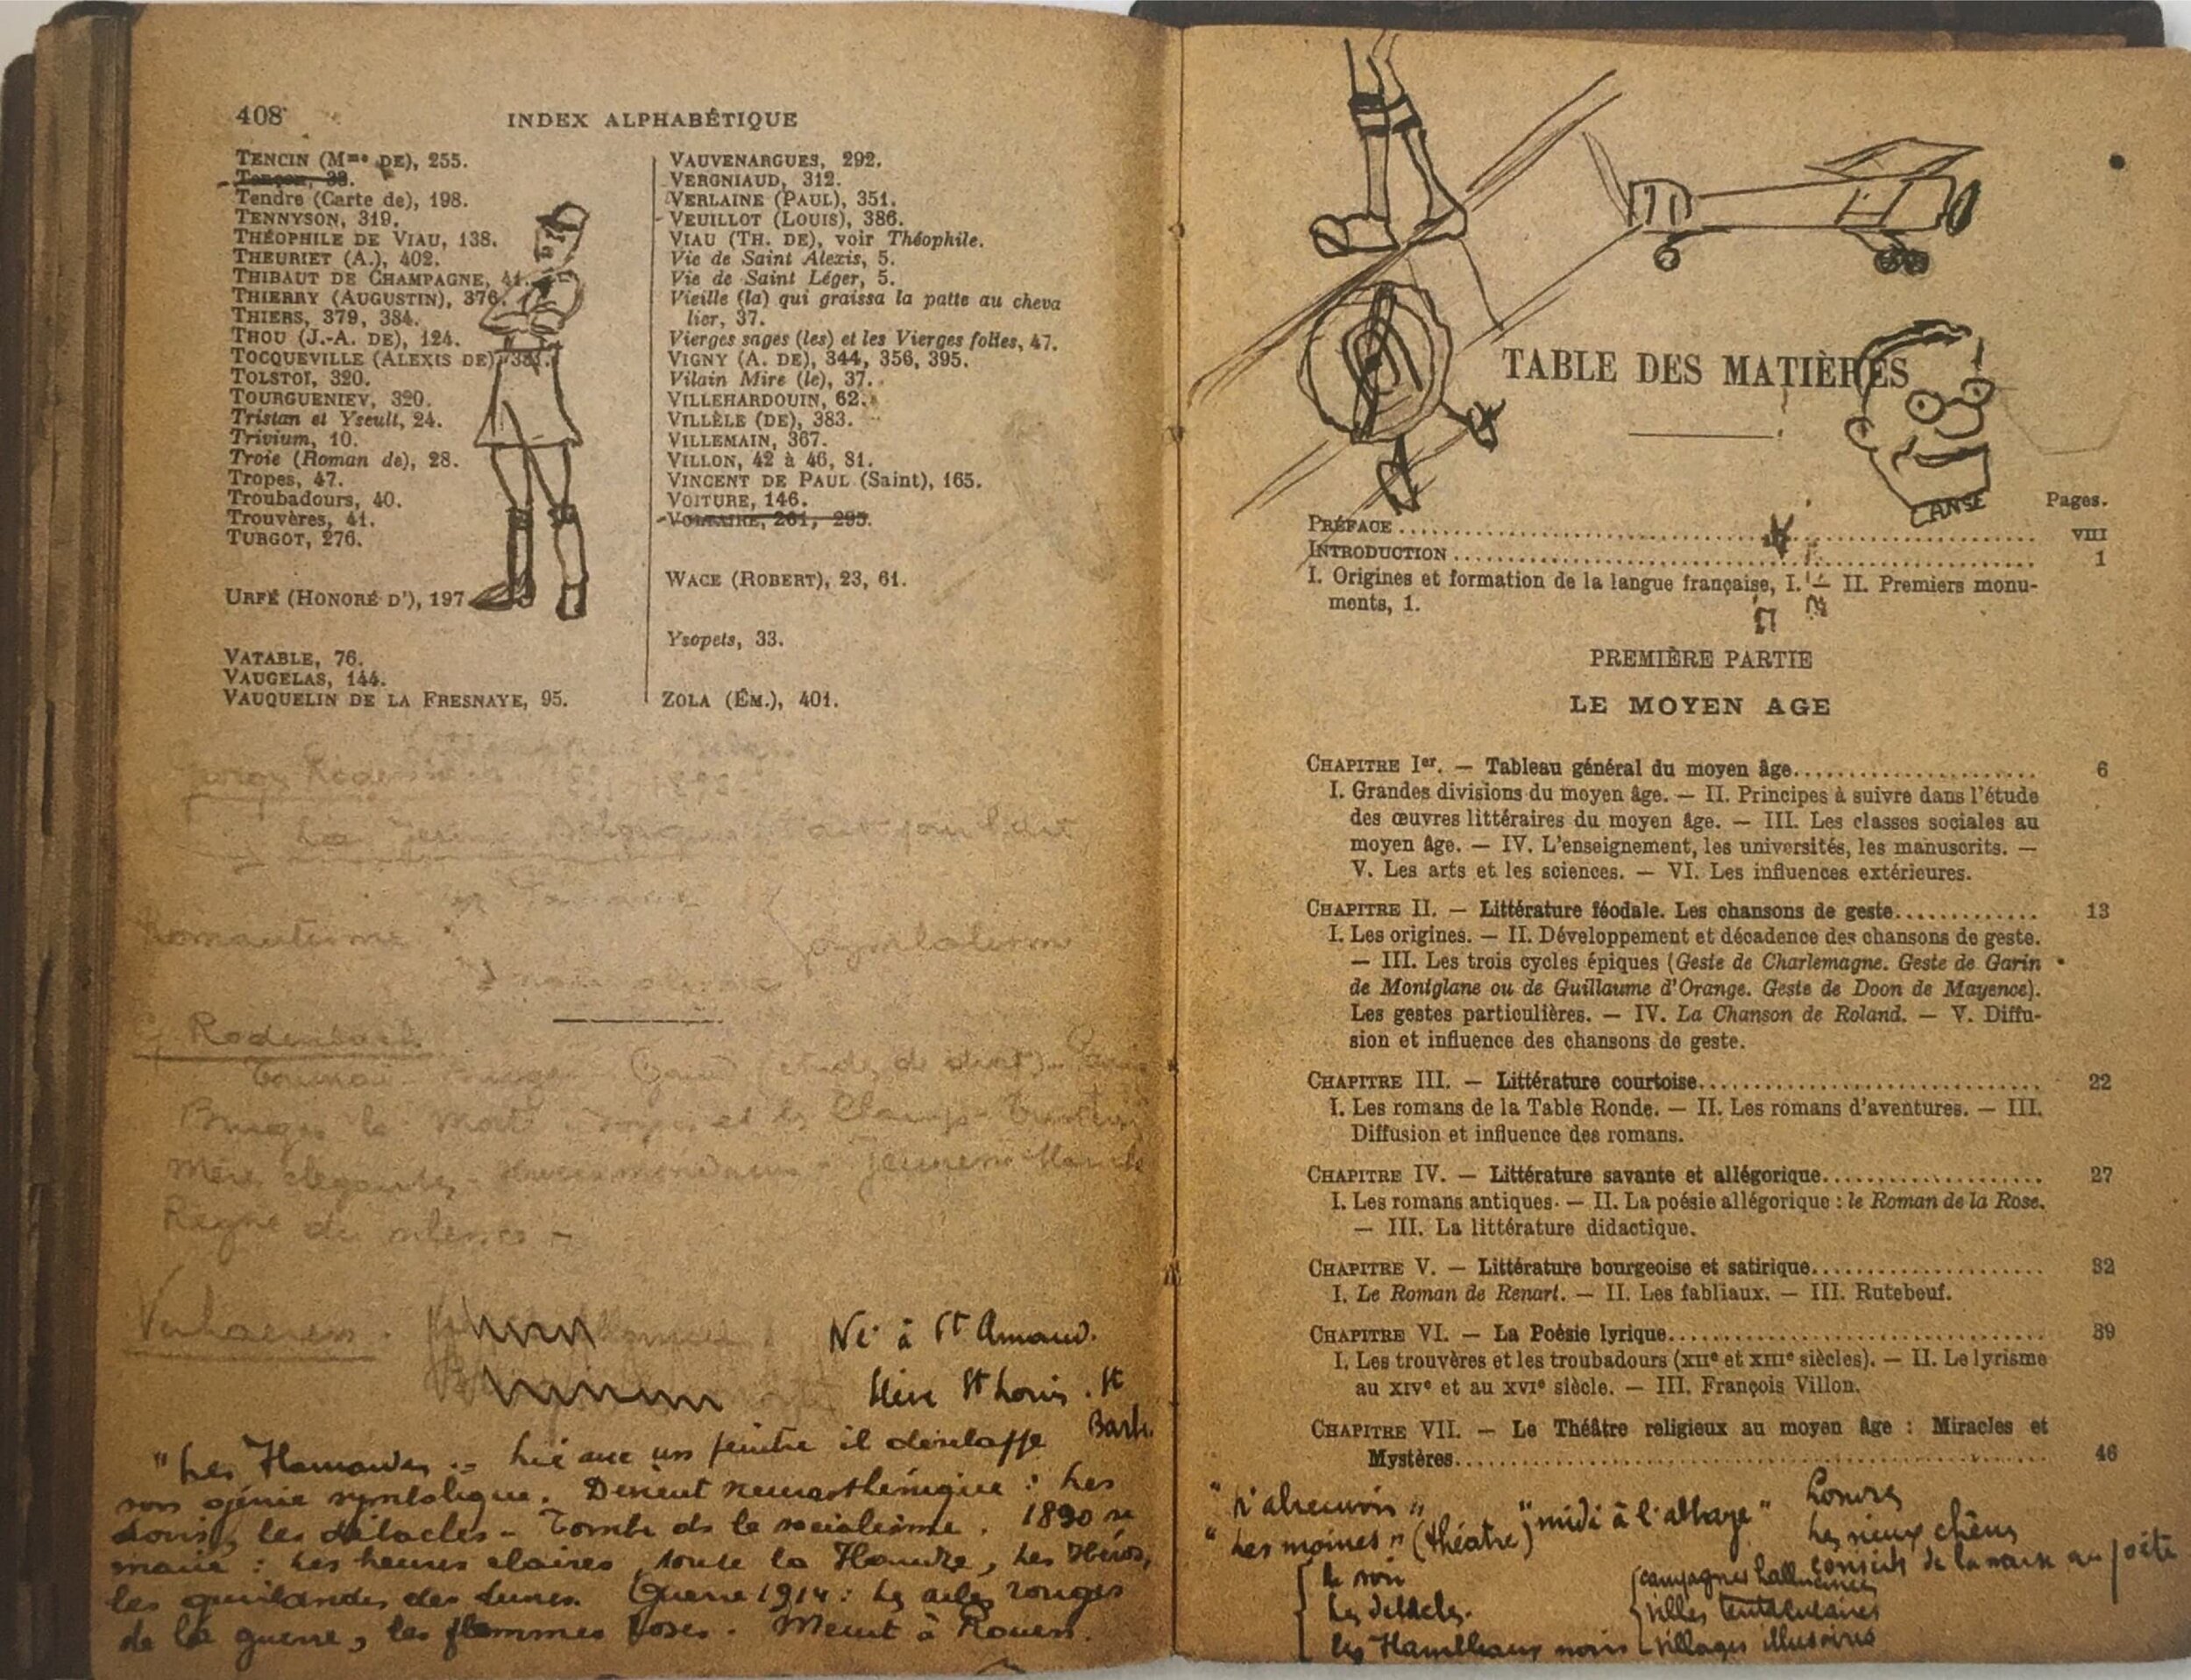  One of Herge’s secondary school textbooks. Note the sketches in the margins and headers.  Philippe Goddin.  The Art of Herge : Inventor of Tintin 1907/1937.  Editions Moulinsart, 2008 